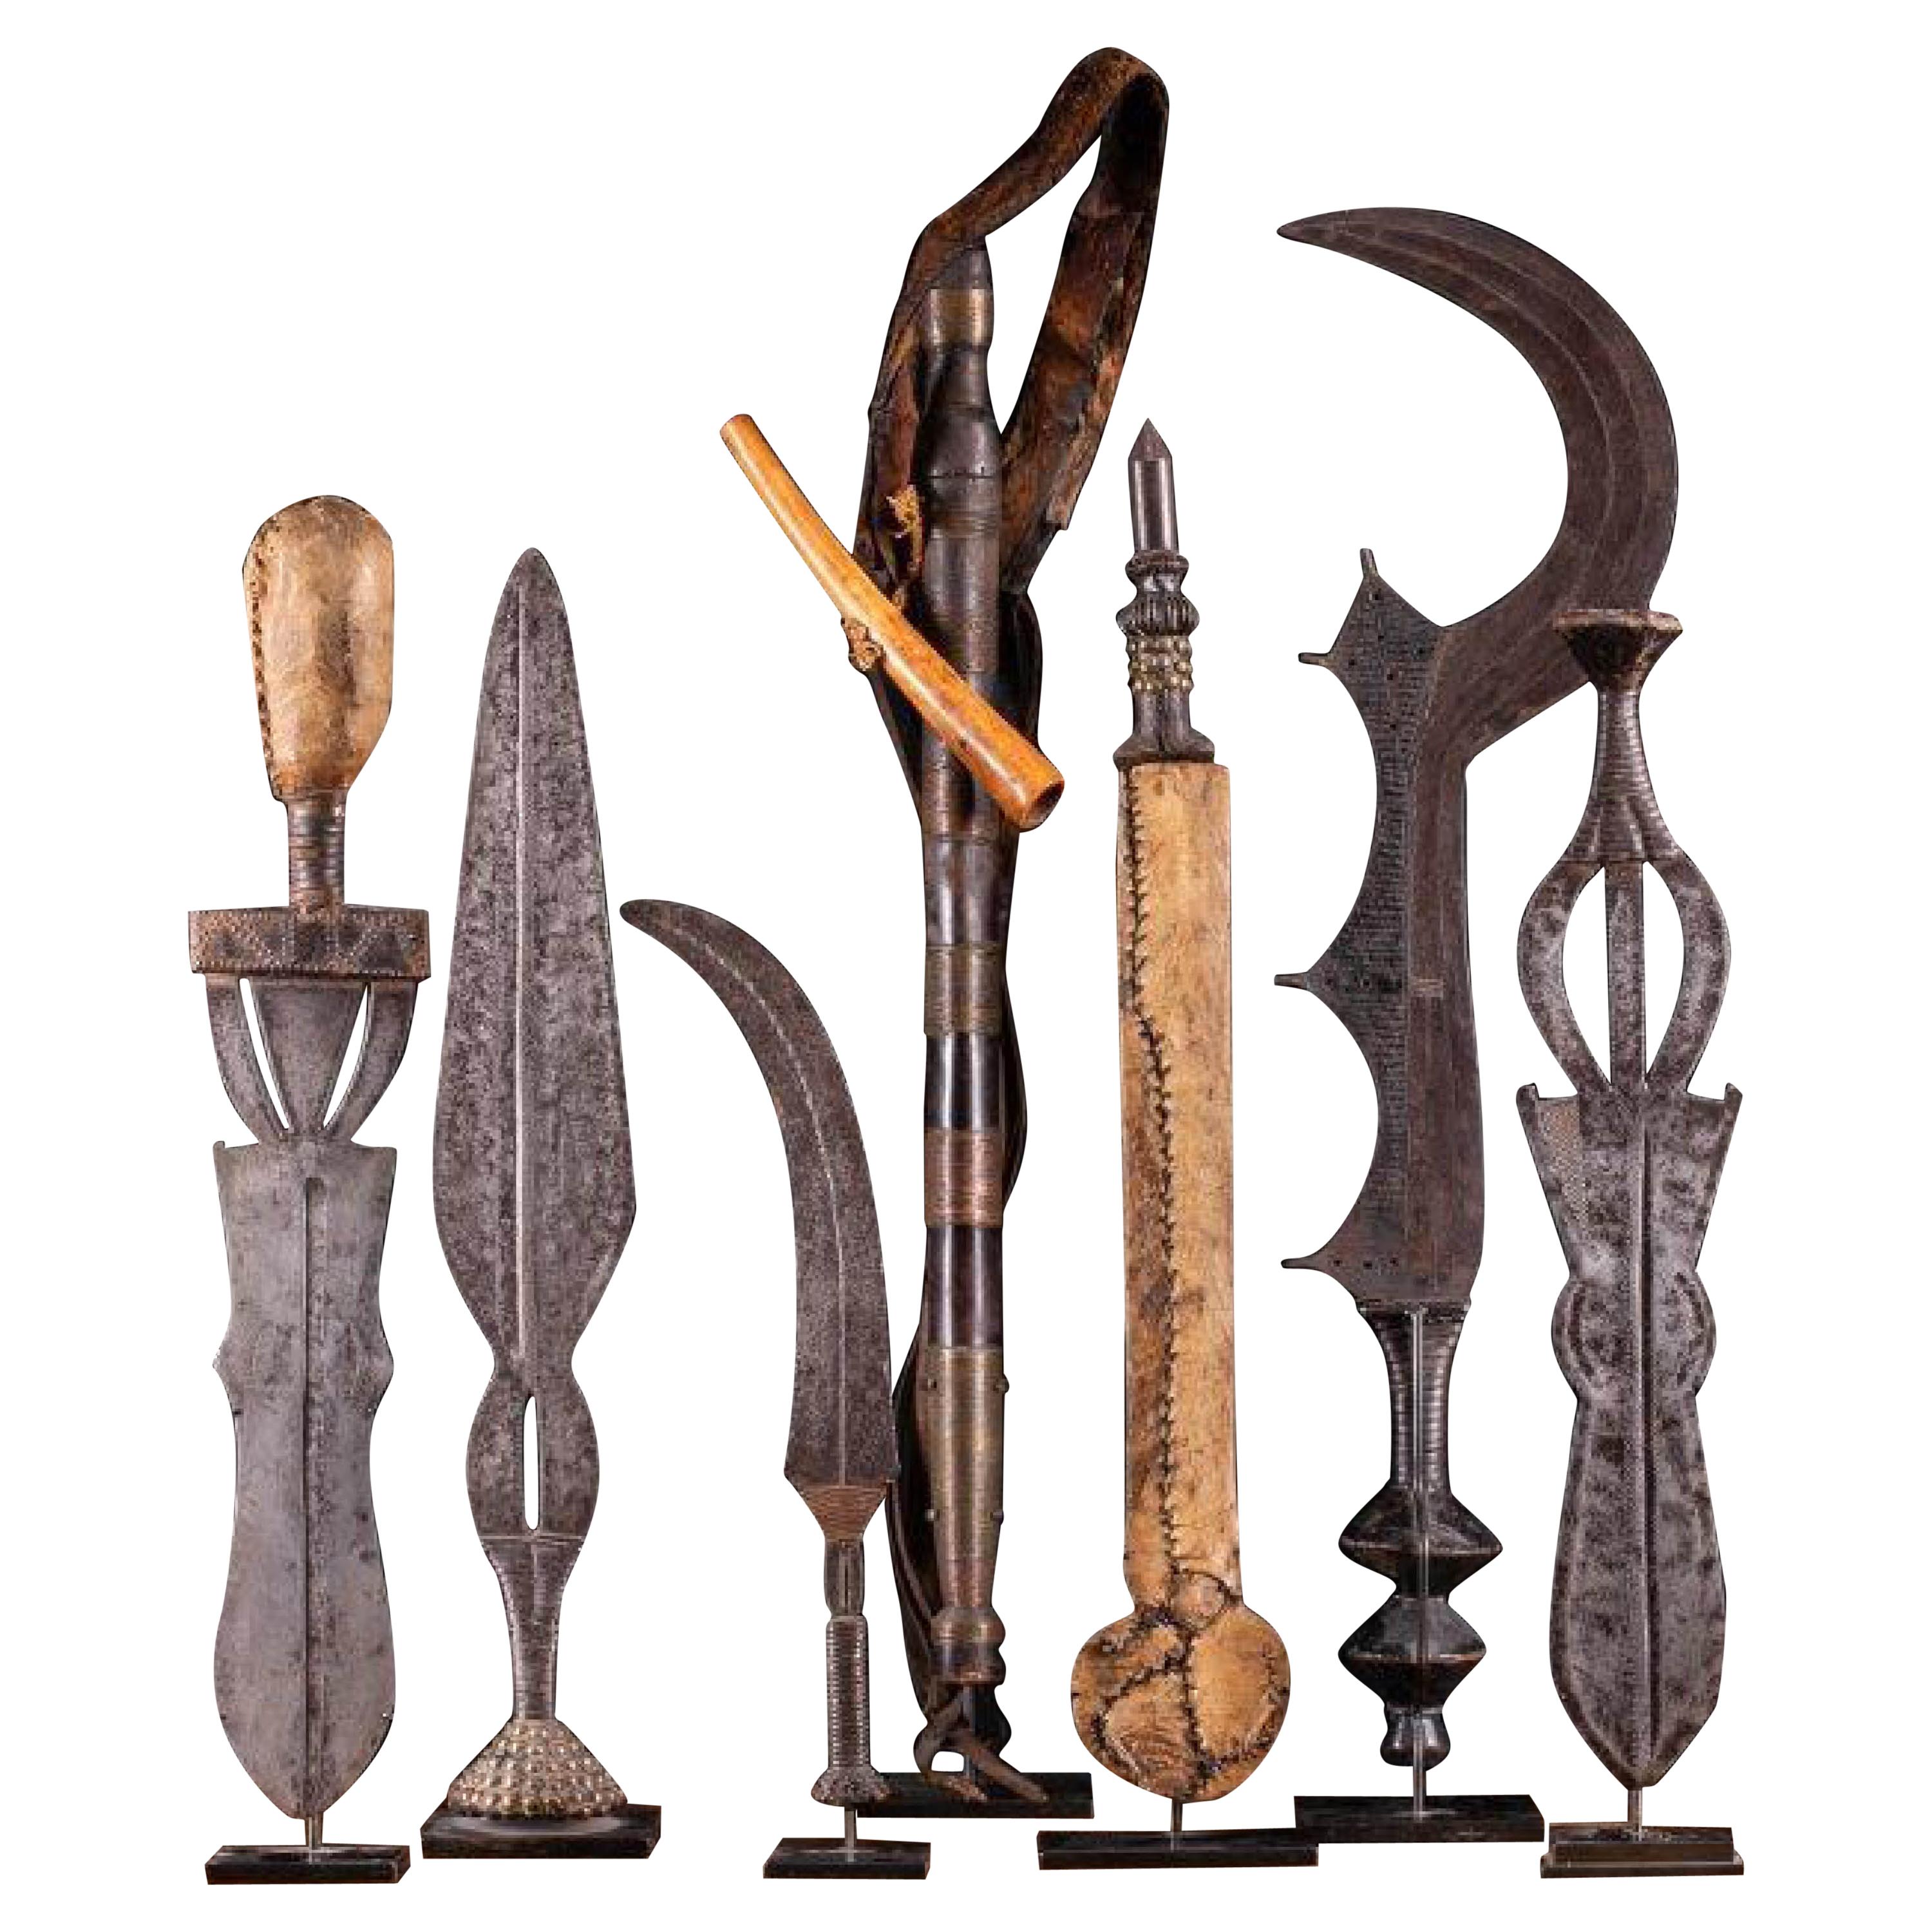 Selection of Authentic Kongo Knives